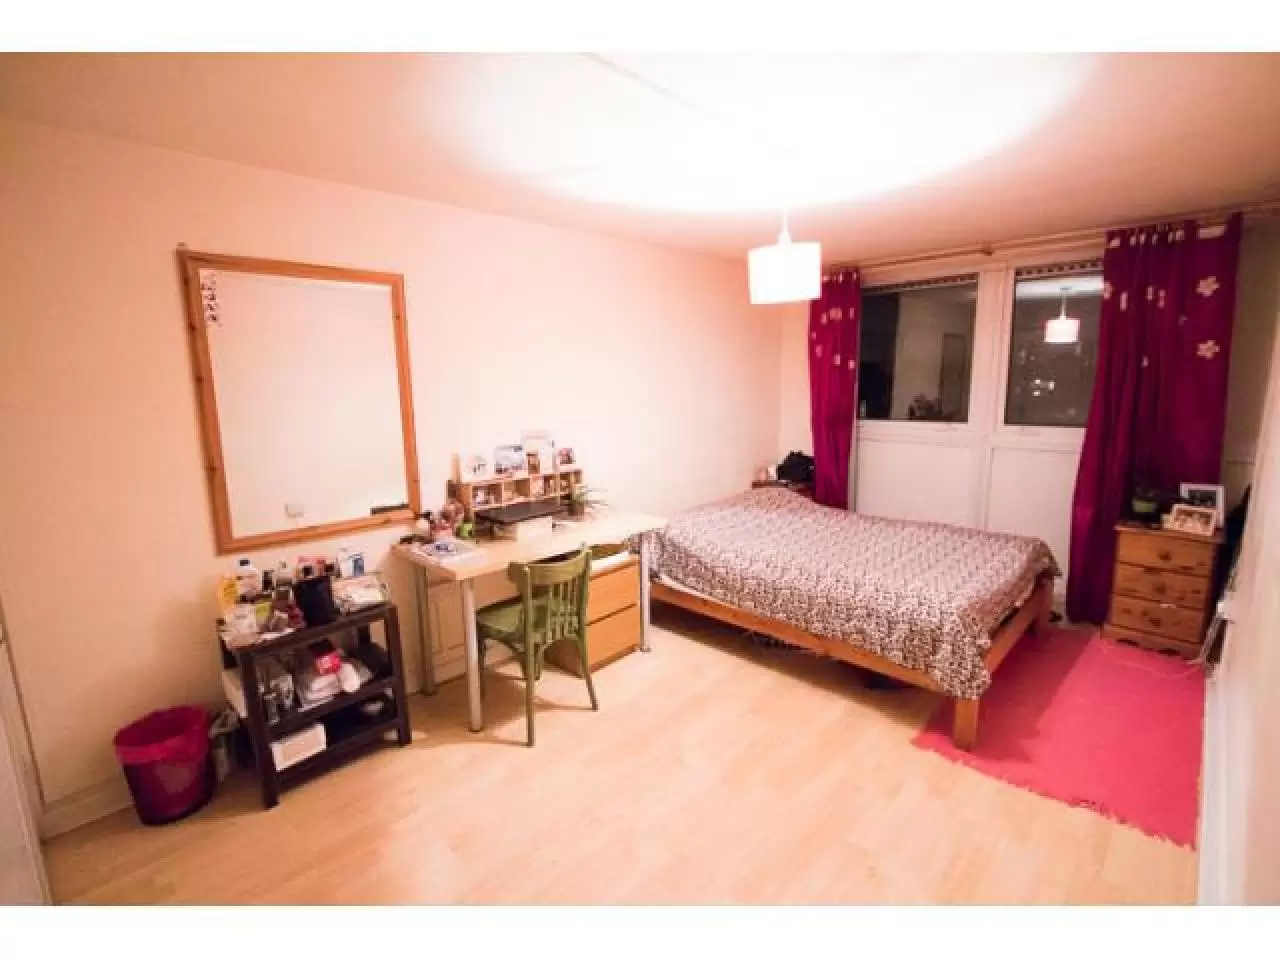 Double комната в аренду, £580/month, all bills included, Bethnal Green, London, ladies only